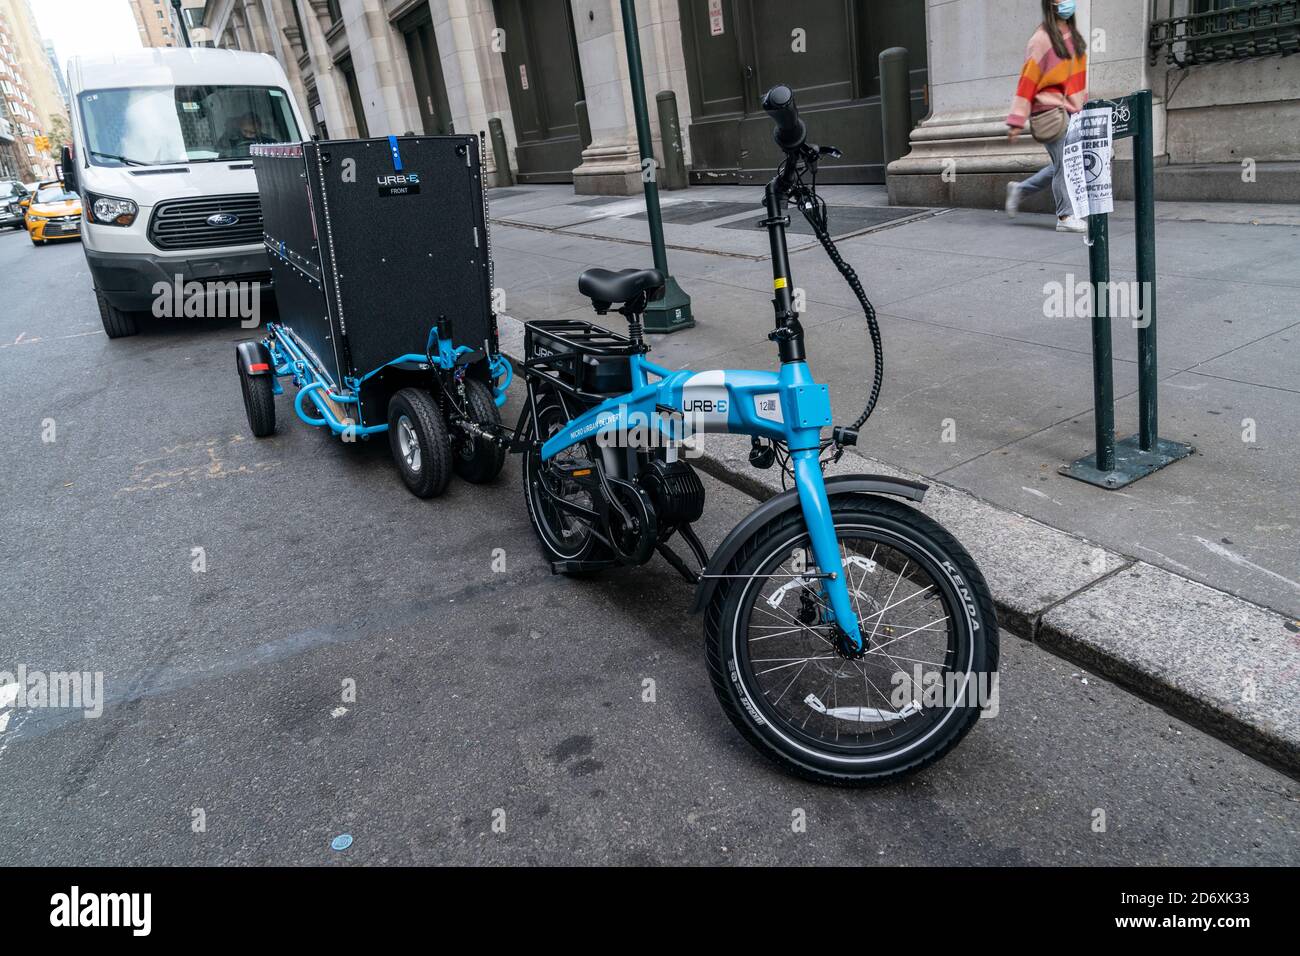 View of Urb-E bike and trailer to be used by Amazon employees for delivery  in New York. In order to make delivery more efficient and reduce greenhouse  gas emissions by cars Amazon will start delivery in New York using Urb-E  bikes and trailers starting ...